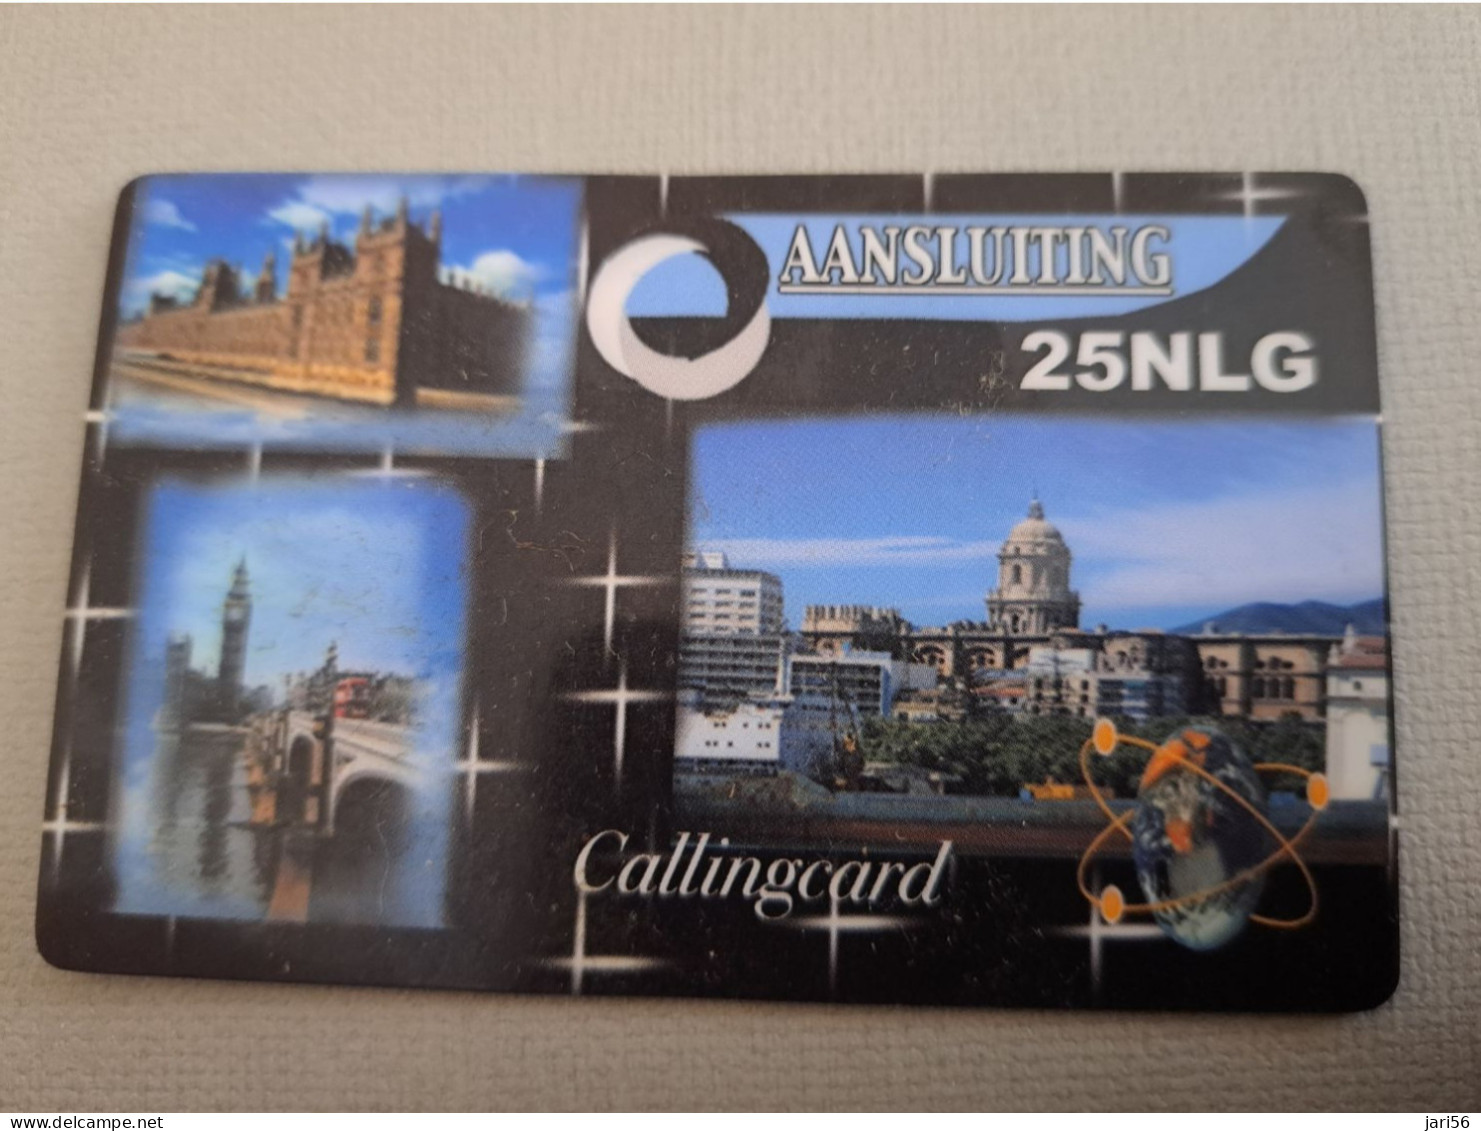 NETHERLANDS /  PREPAID /  AANSLUITING CALLINGCARD/ CONNECTING WEB & PHONE  /      HFL 25,-/  USED  ** 15286** - Private